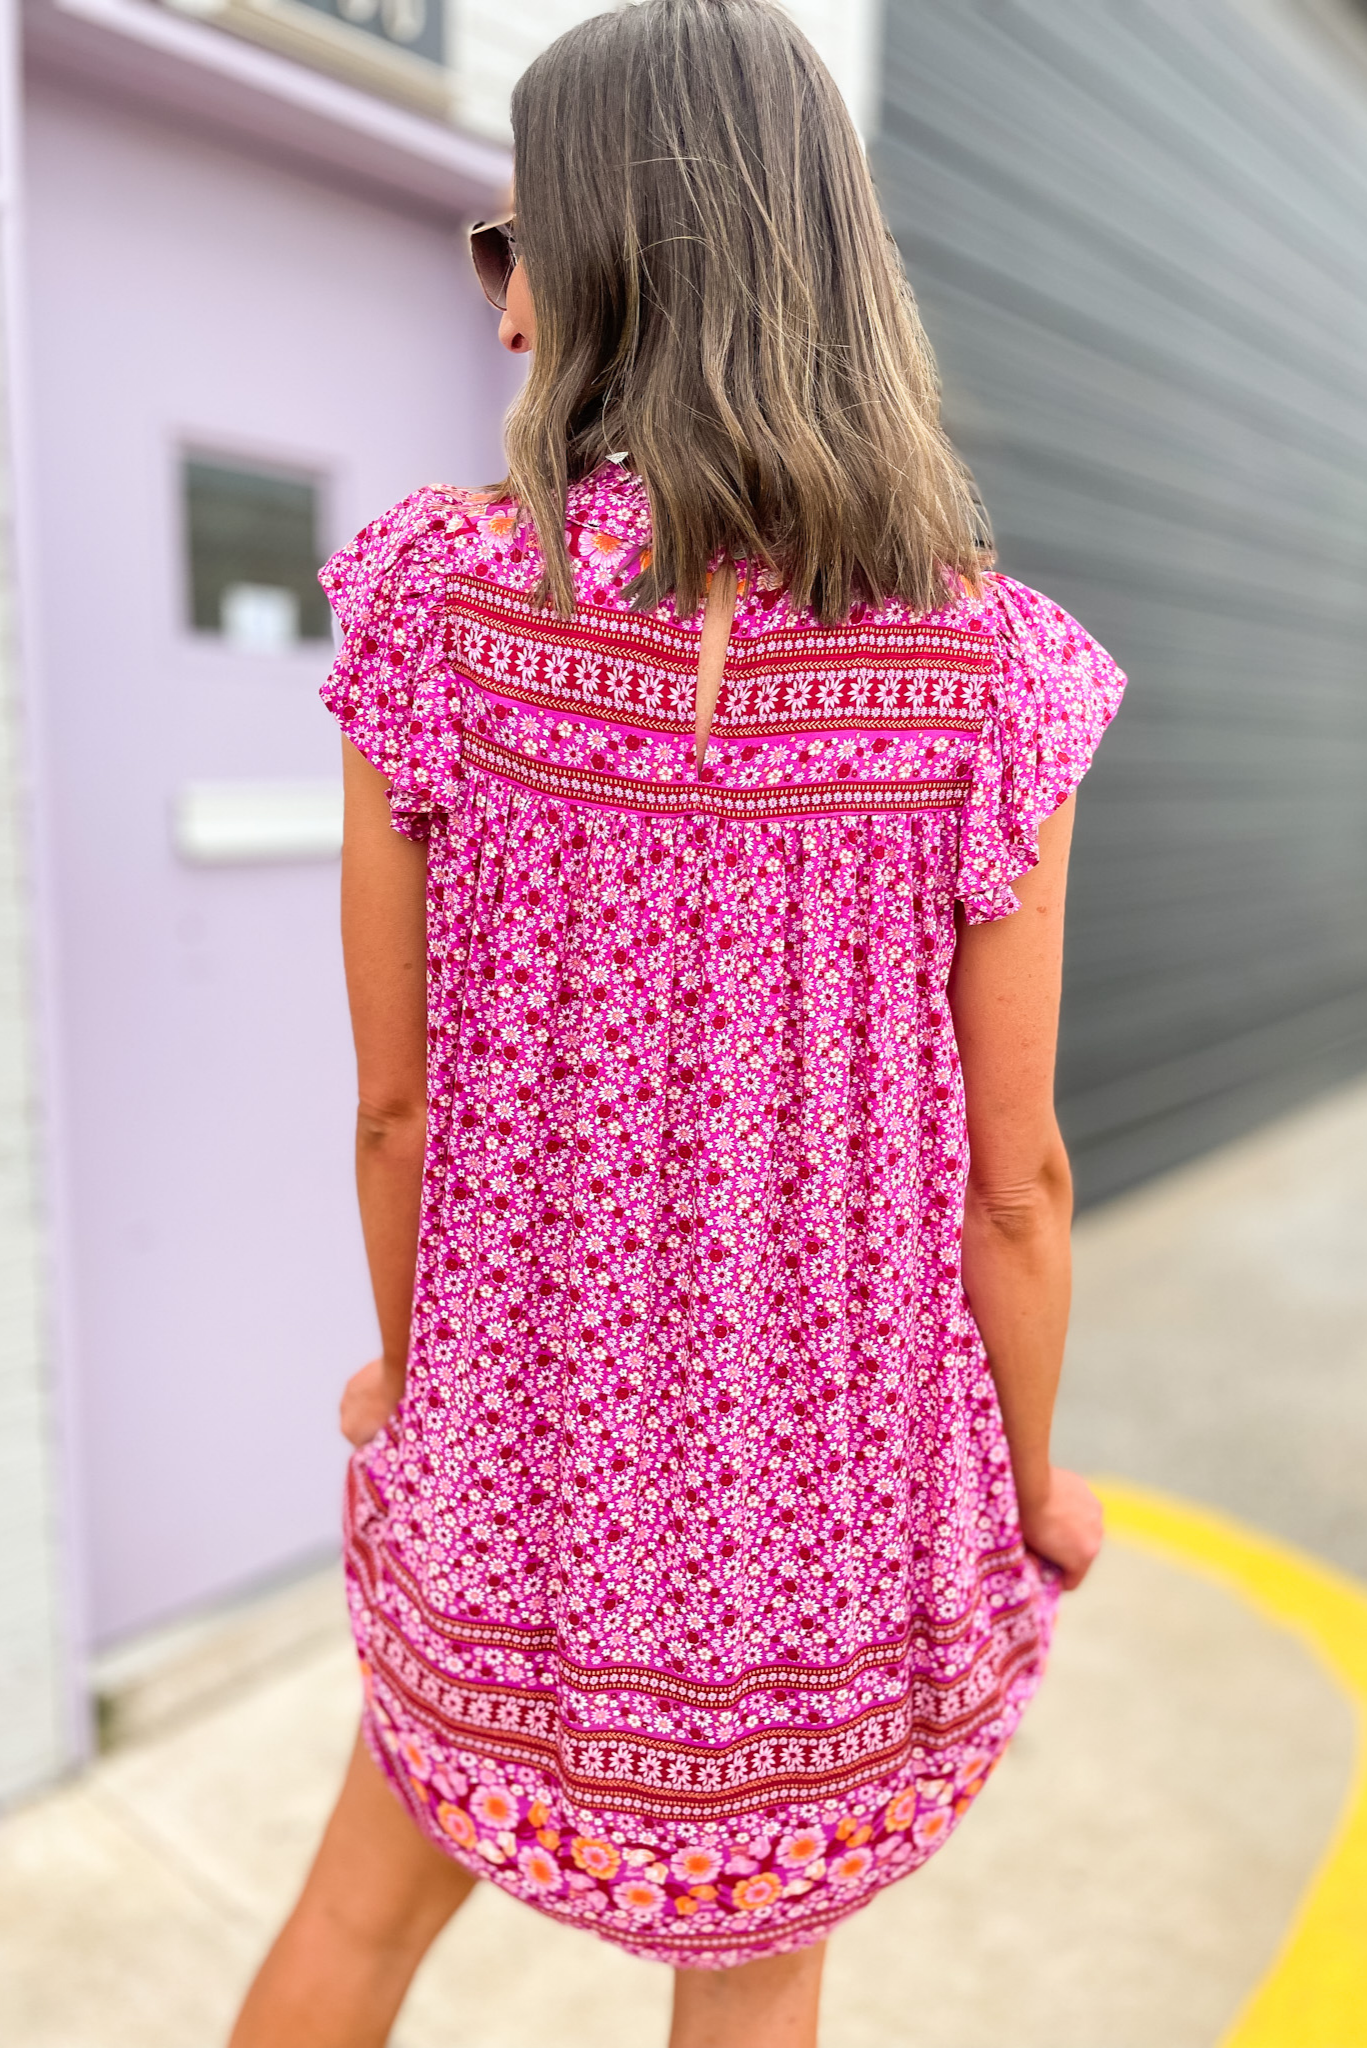 Fuchsia Floral Print Smocked Yoke Dress, smocked dress, floral print, ruffle sleeve, high neck, summer dress, shop style your senses by mallory fitzismmons